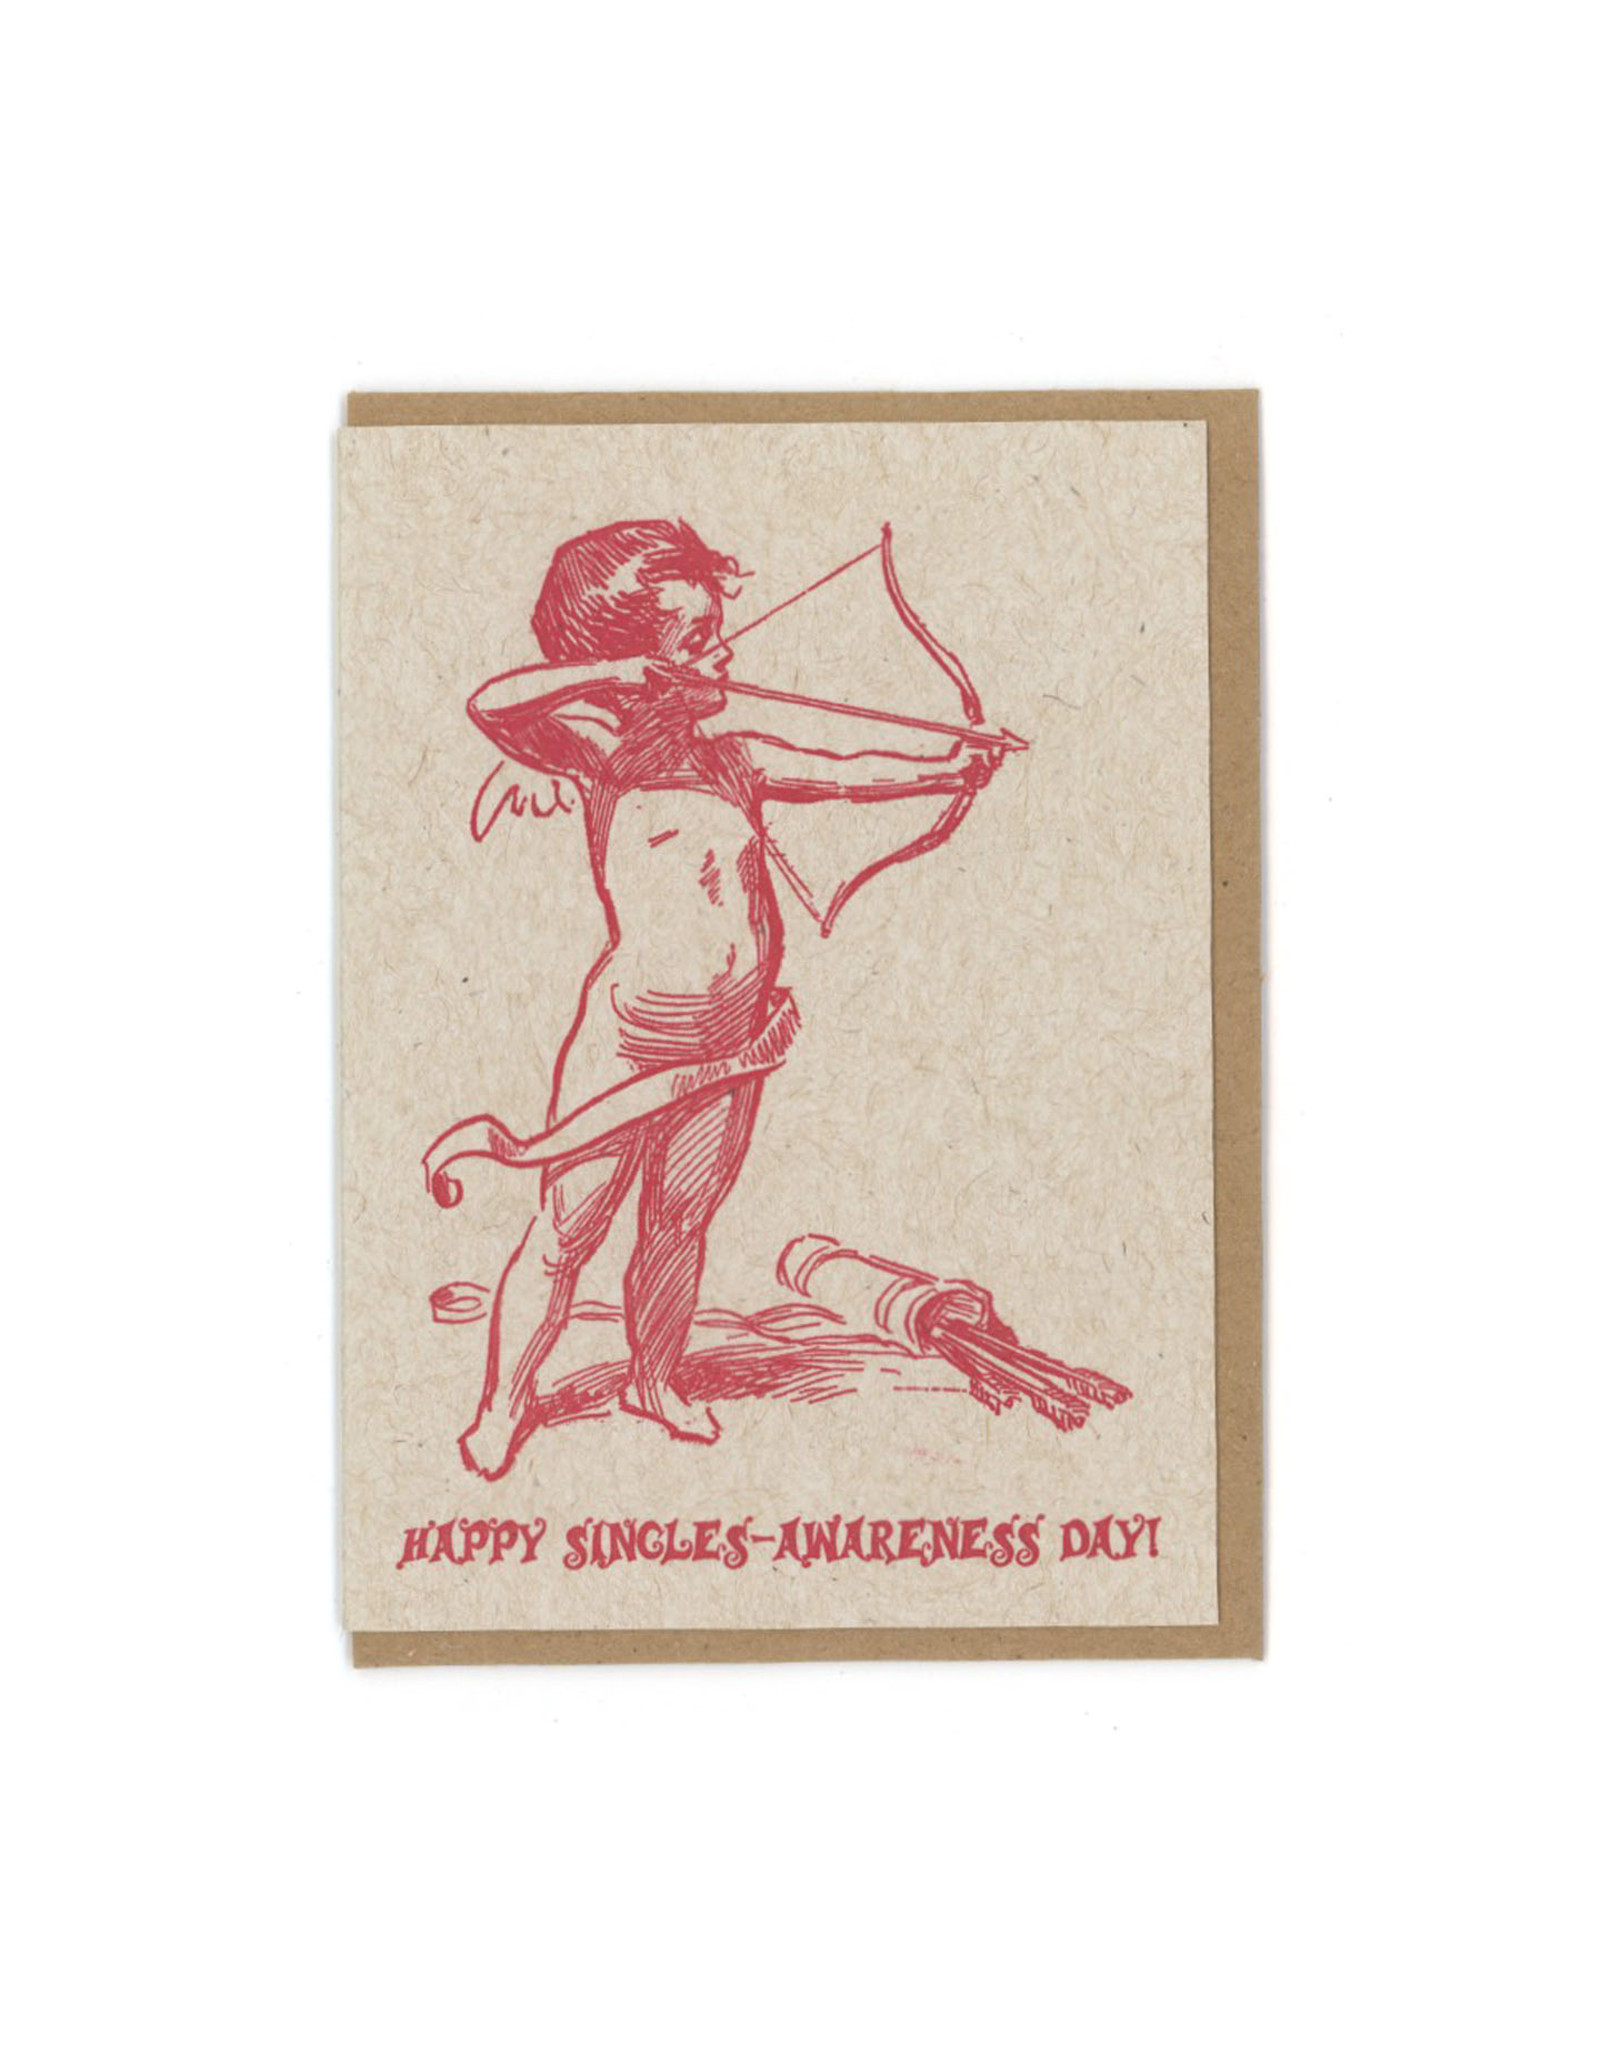 Happy Singles-Awareness Day Greeting Card